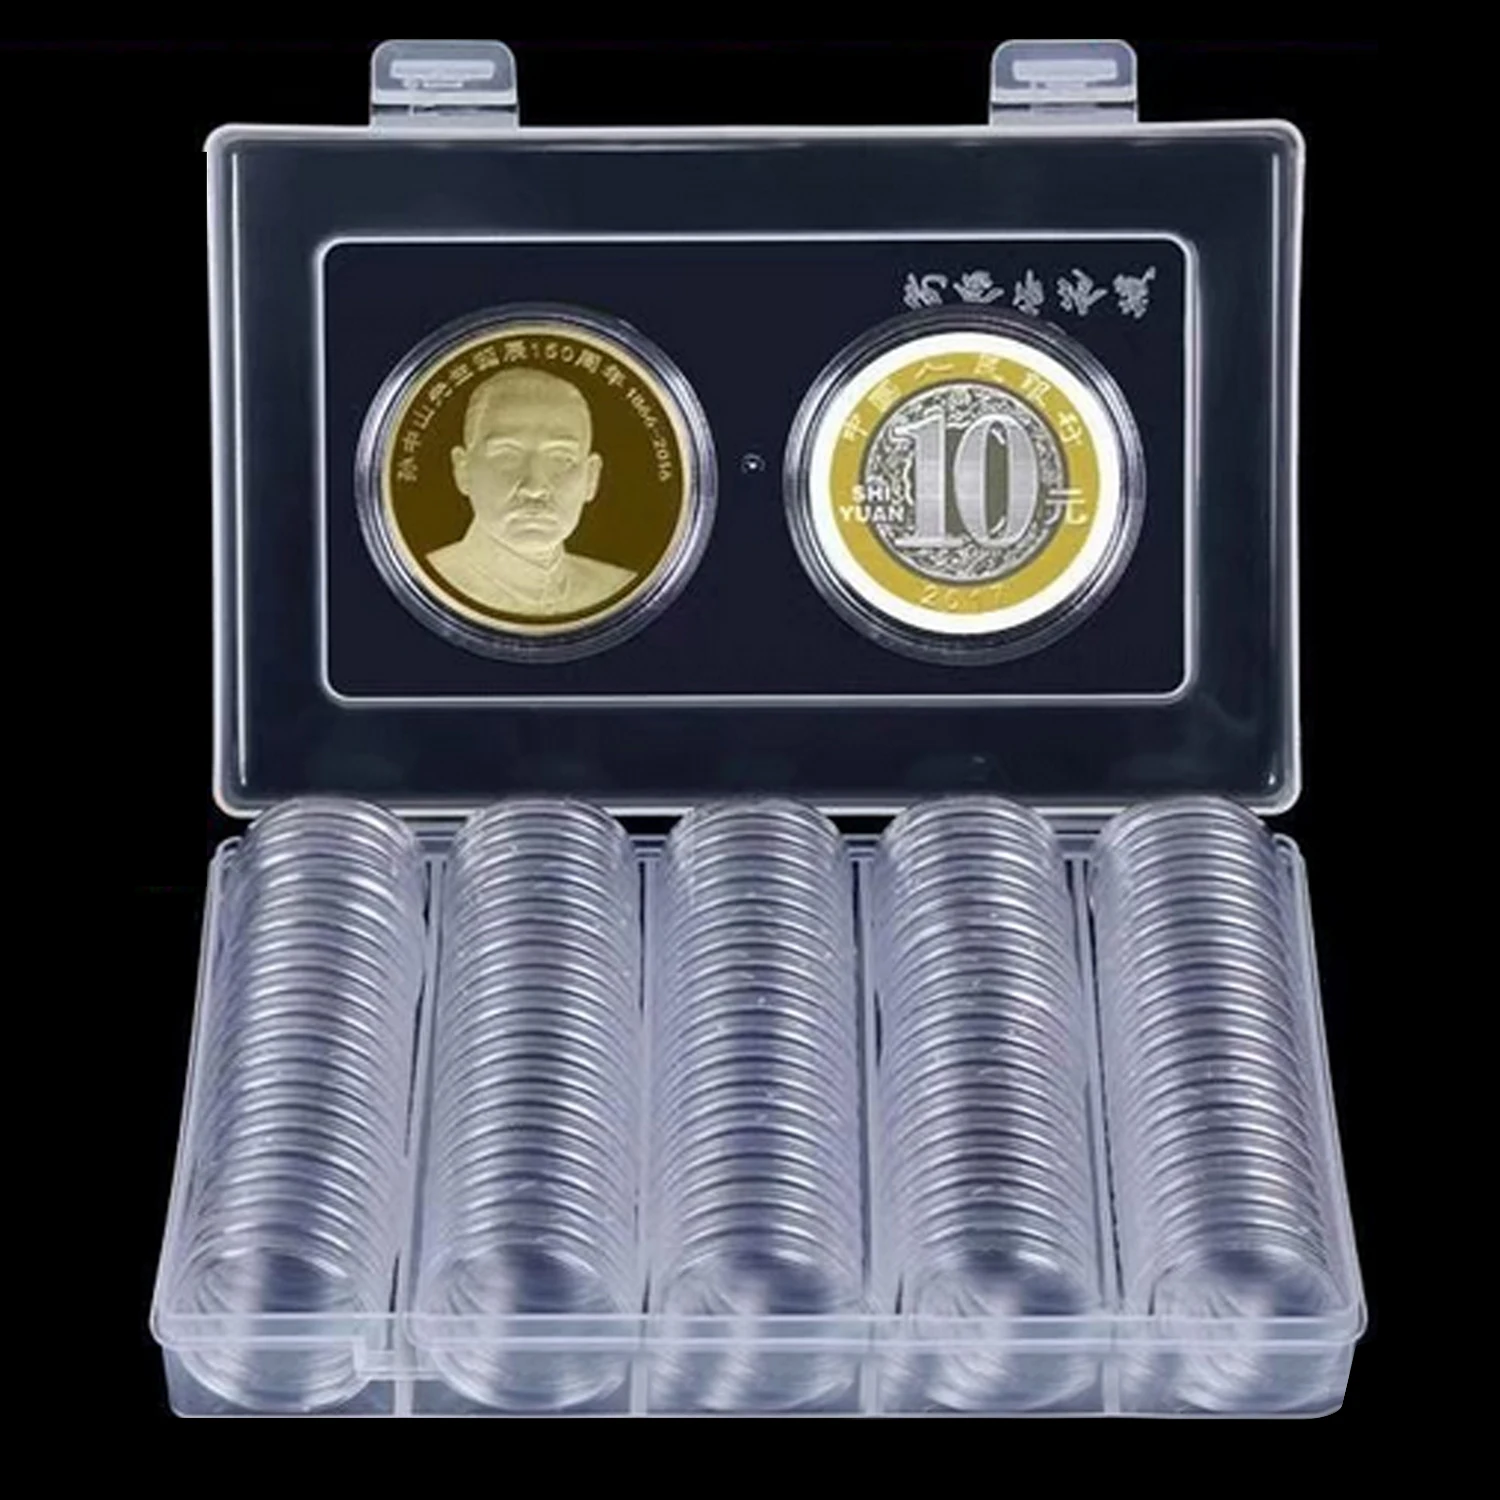 100 Pieces 30mm Coin Holder Coin Capsules and 100Pcs 3 Sizes Foam Cushions with Clear Plastic Storage Organizer Box for Coin Collection Supplies 25/27/30mm